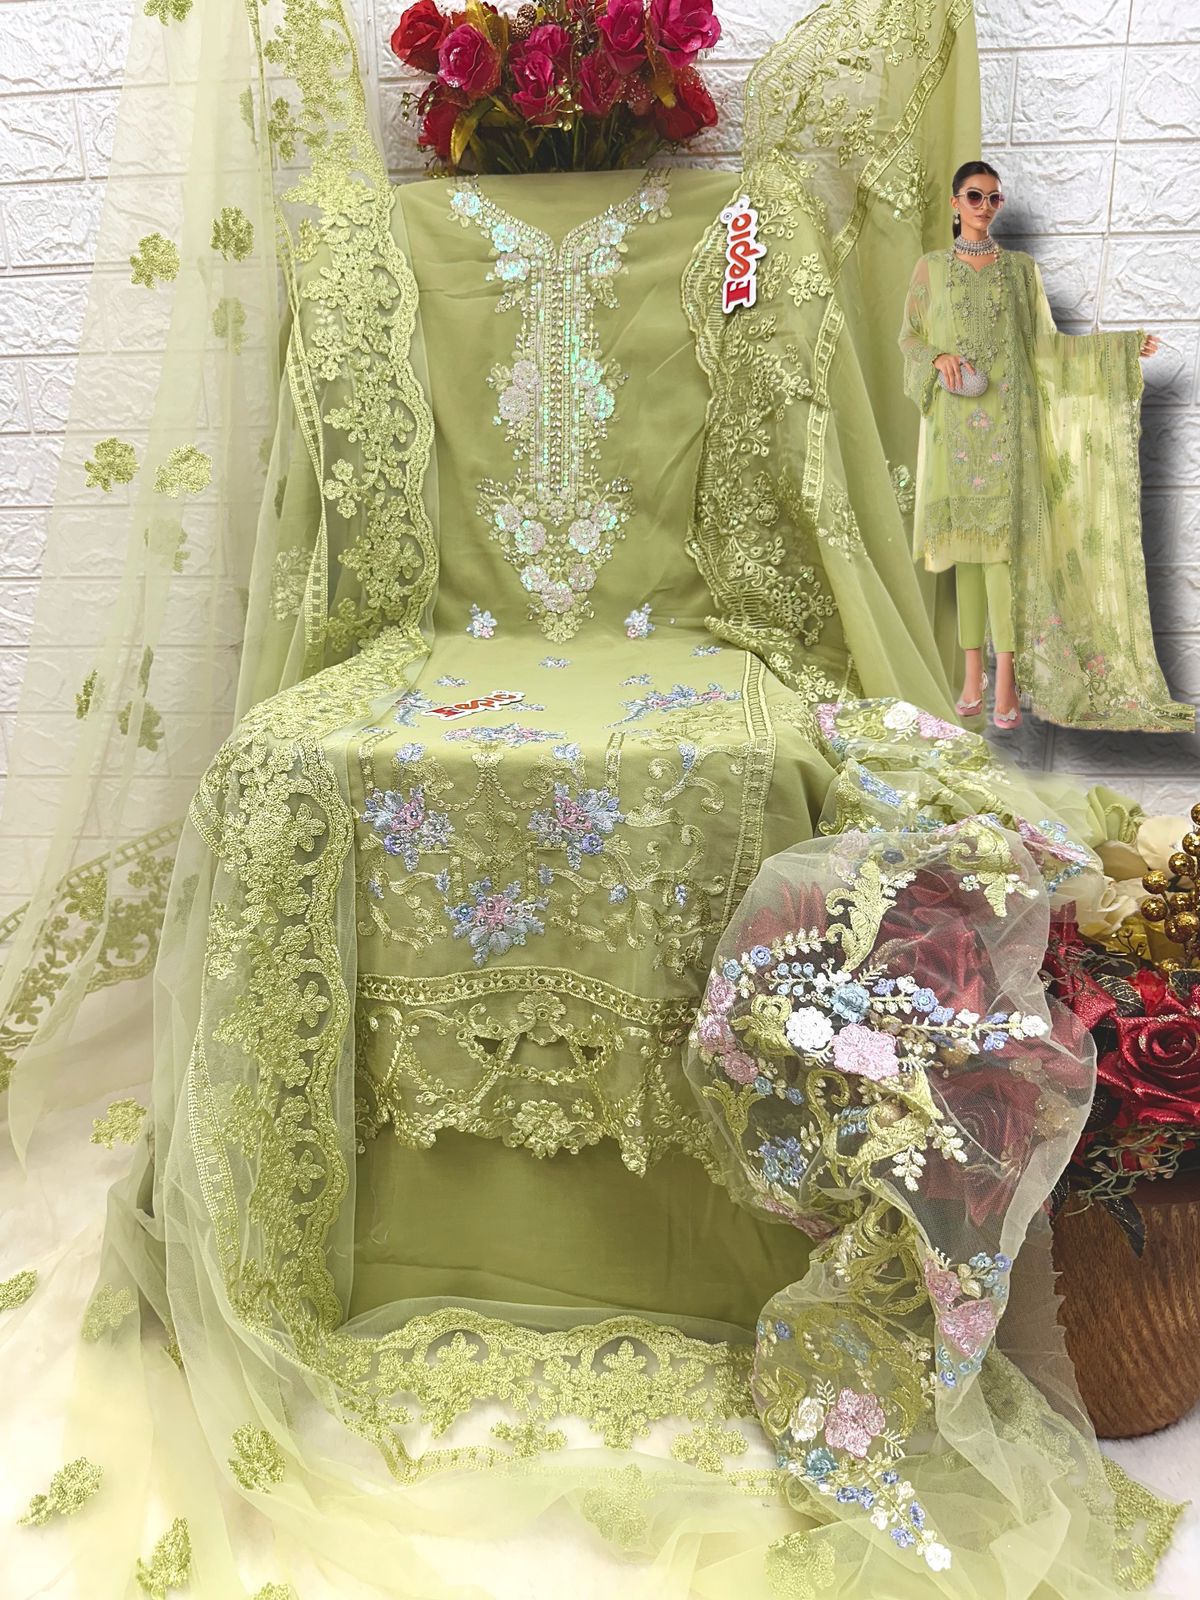 Fepic Rosemeen Maria B Embroide Vol 6 Georgette With Embroidery Work Pakistani Georgette Dresses - jilaniwholesalesuit